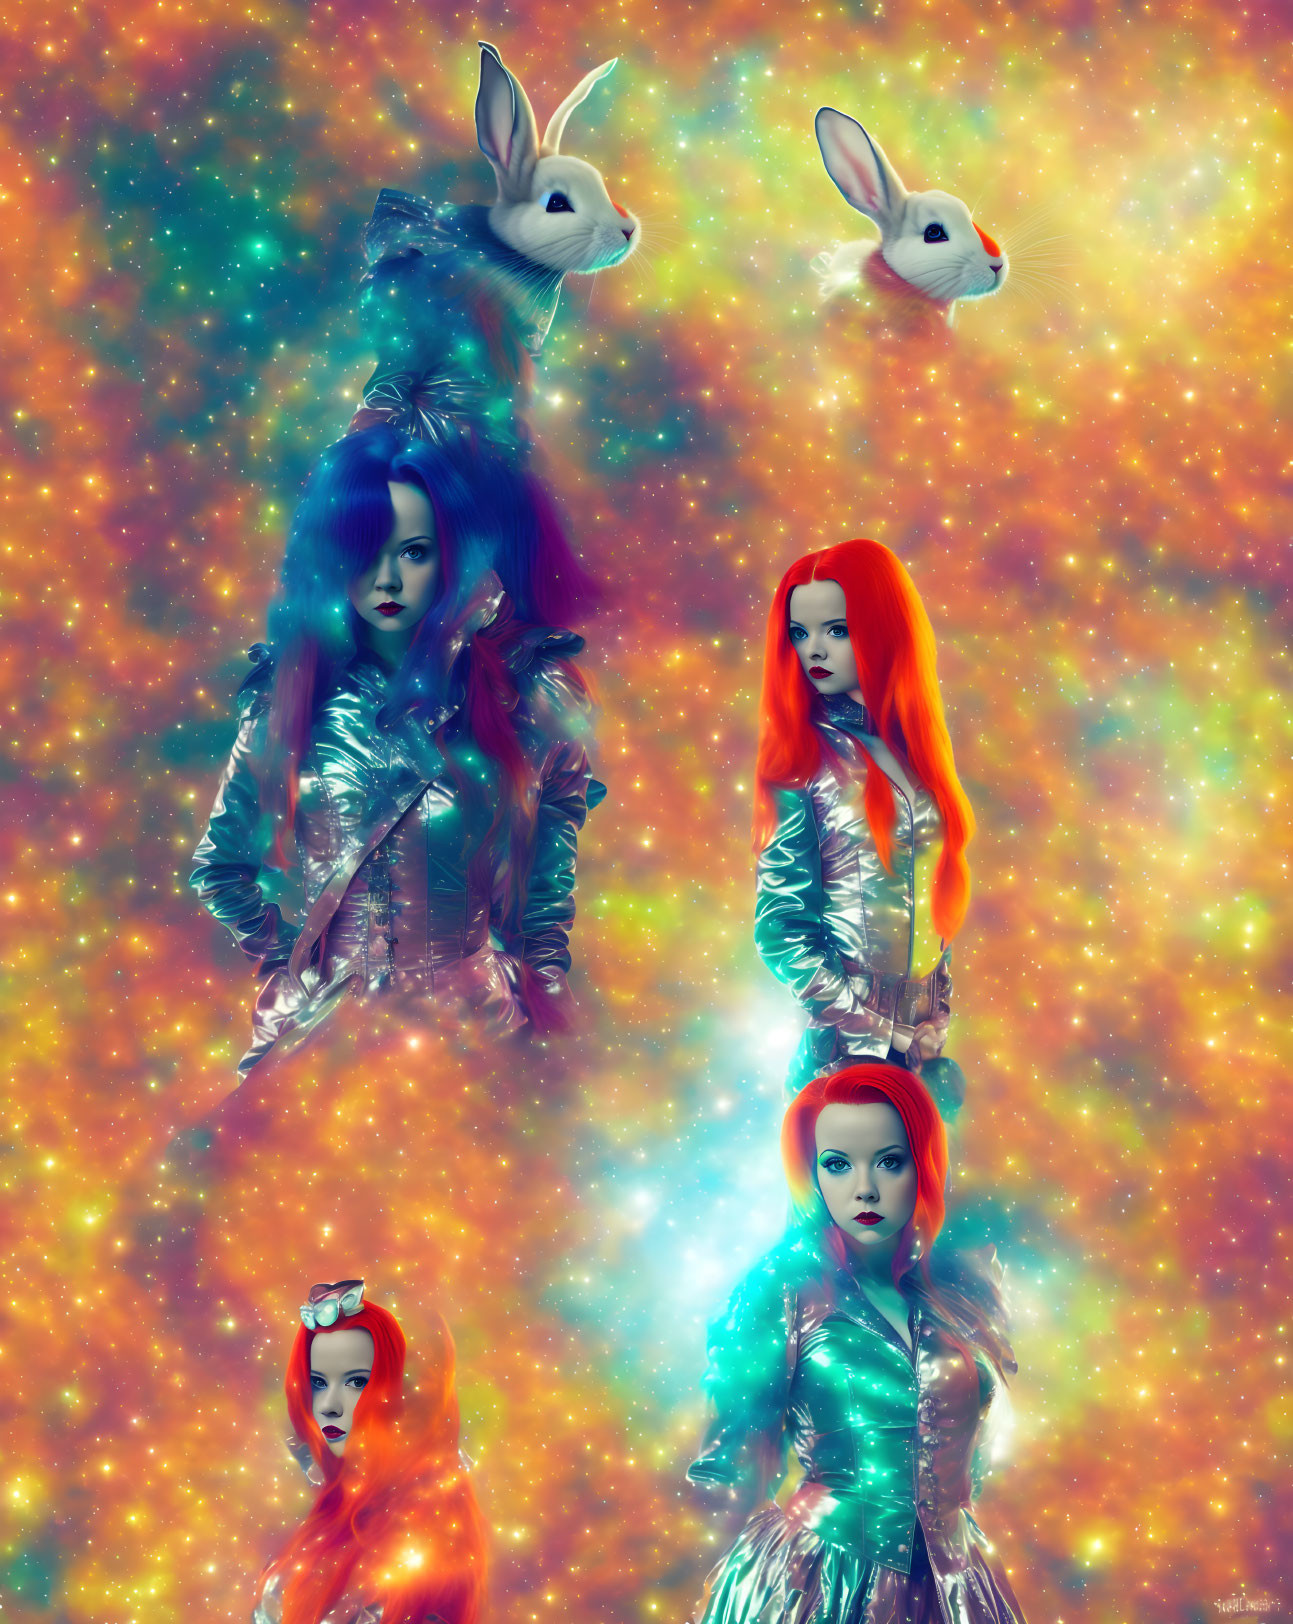 Four female figures in metallic outfits with rabbit masks against a starry galaxy.